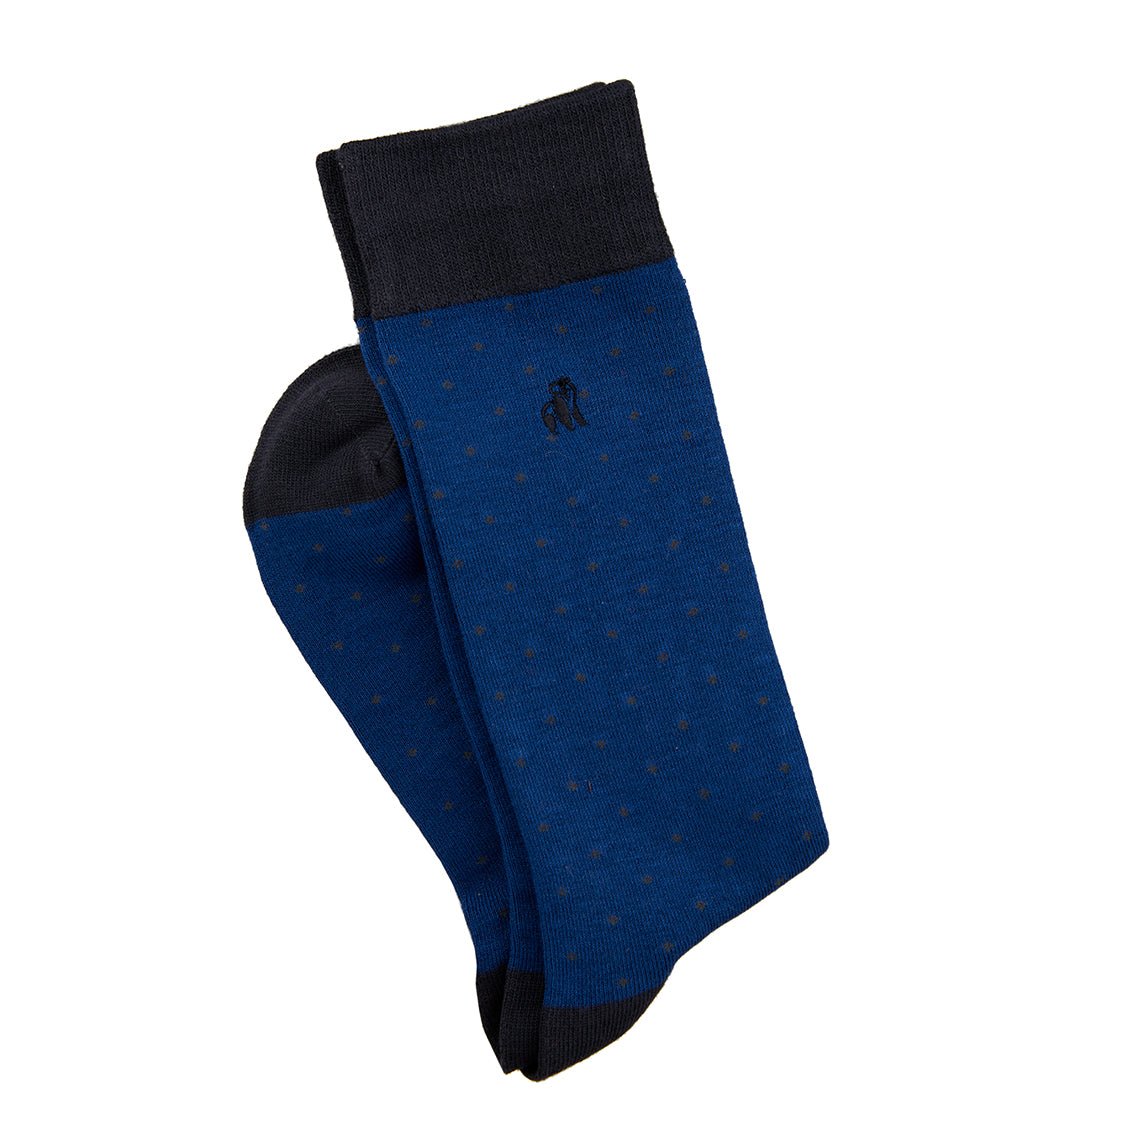 Bamboo Socks - Choose From Multiple Designs - Life of Riley